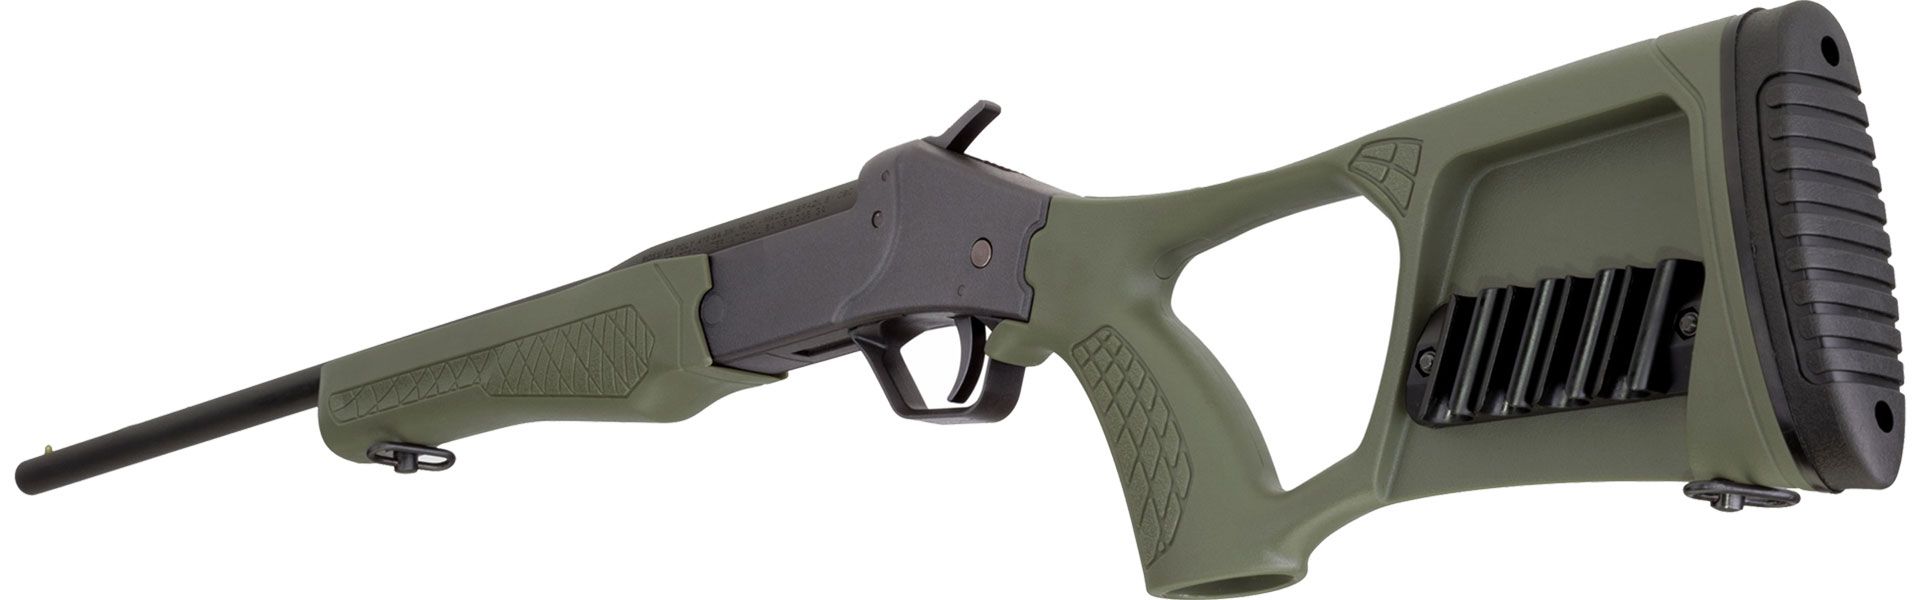 SS POLY TUFFY Polymer, 410 BORE, BK/OD GREEN, 18 in.